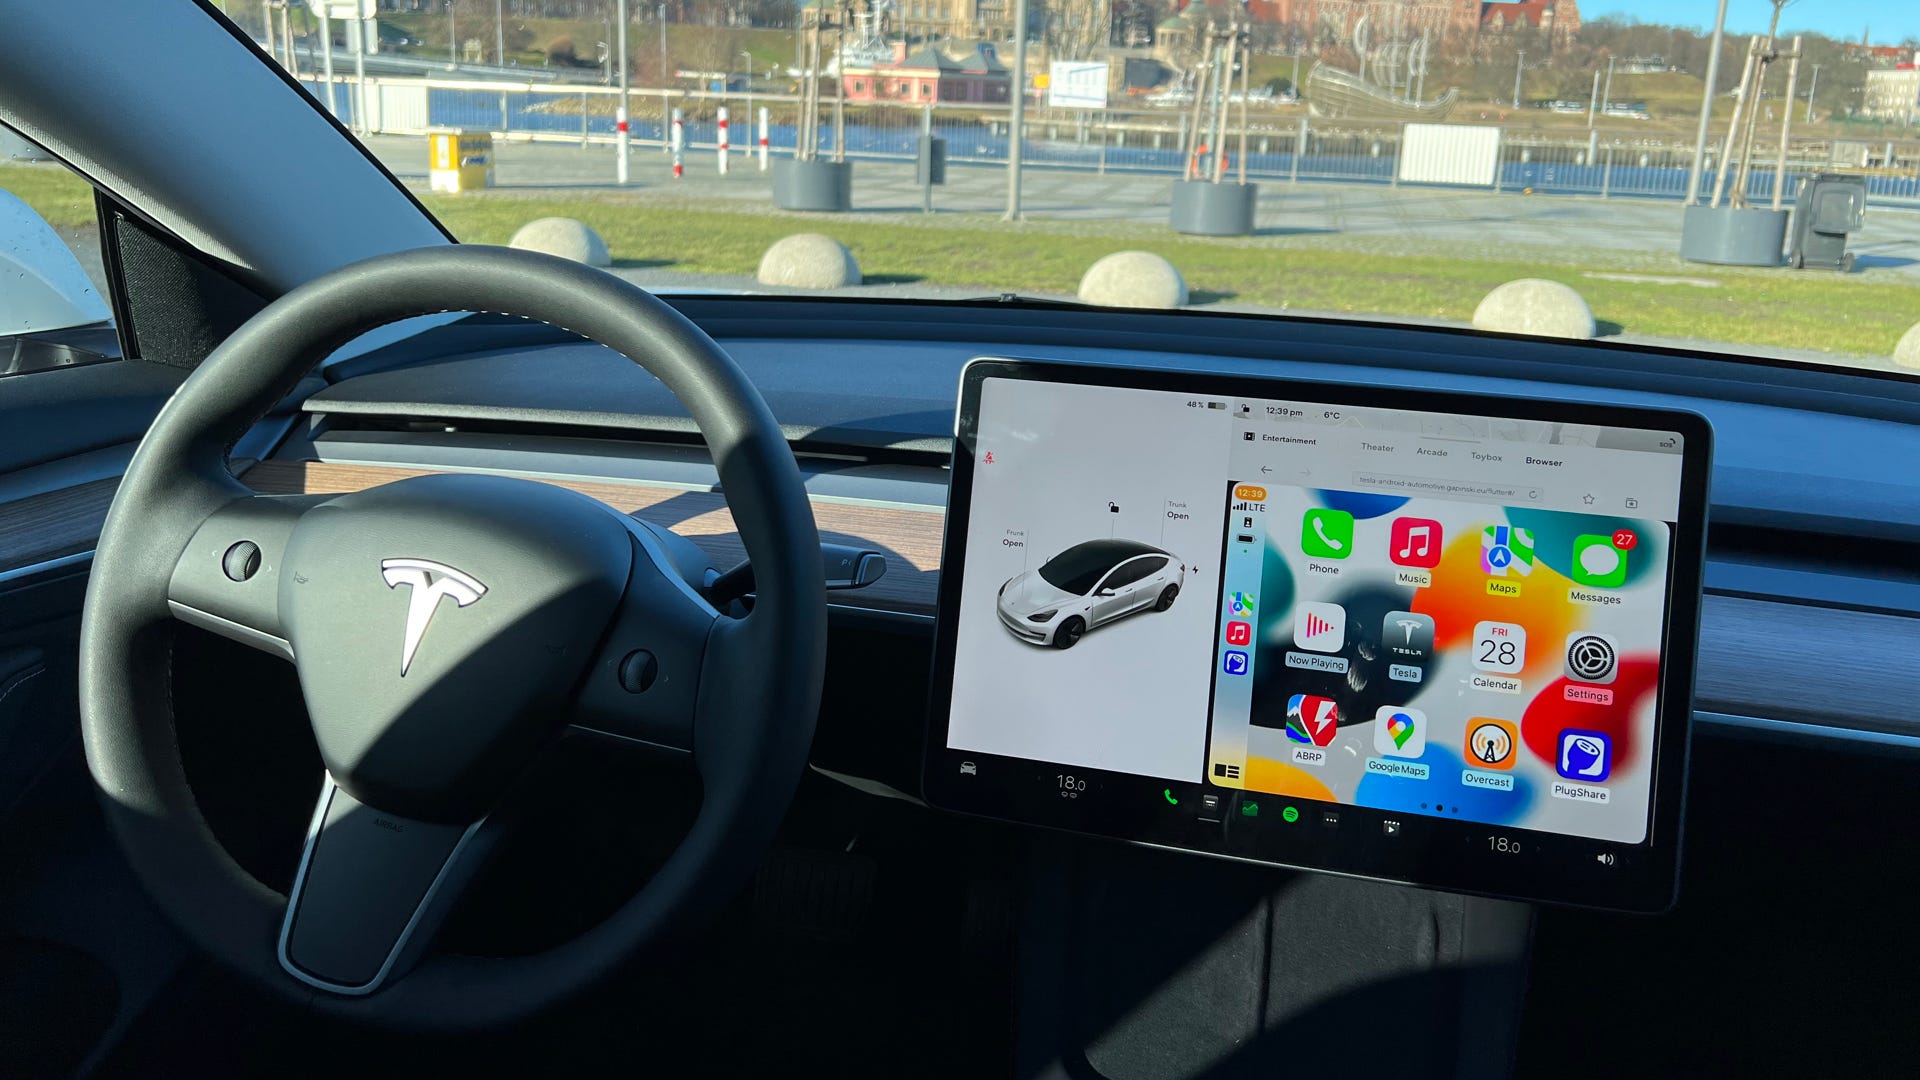 This Clever Raspberry Pi Hack Adds Android Auto to Tesla Vehicles – Review Geek